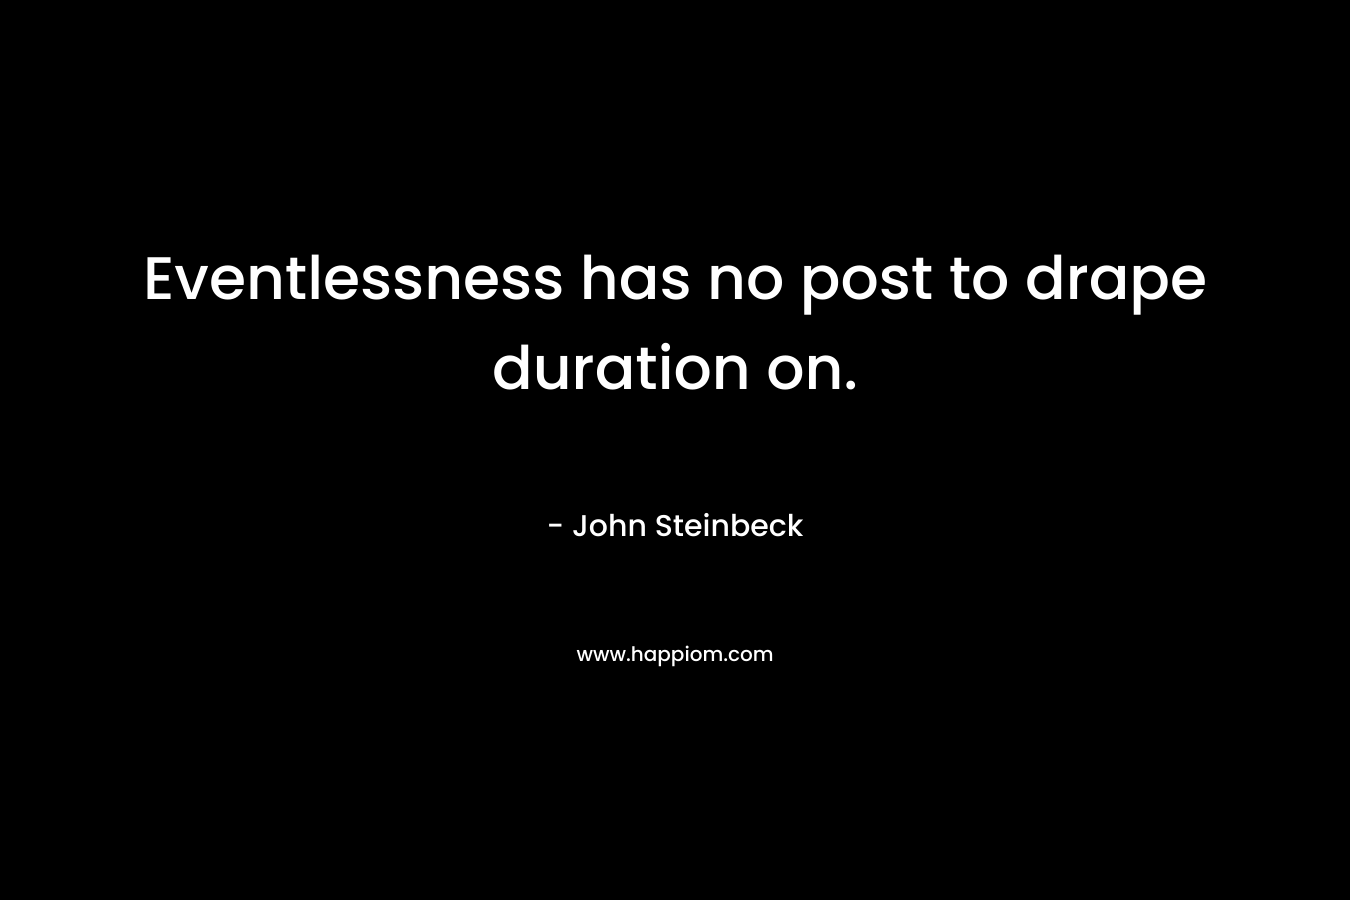 Eventlessness has no post to drape duration on. – John Steinbeck